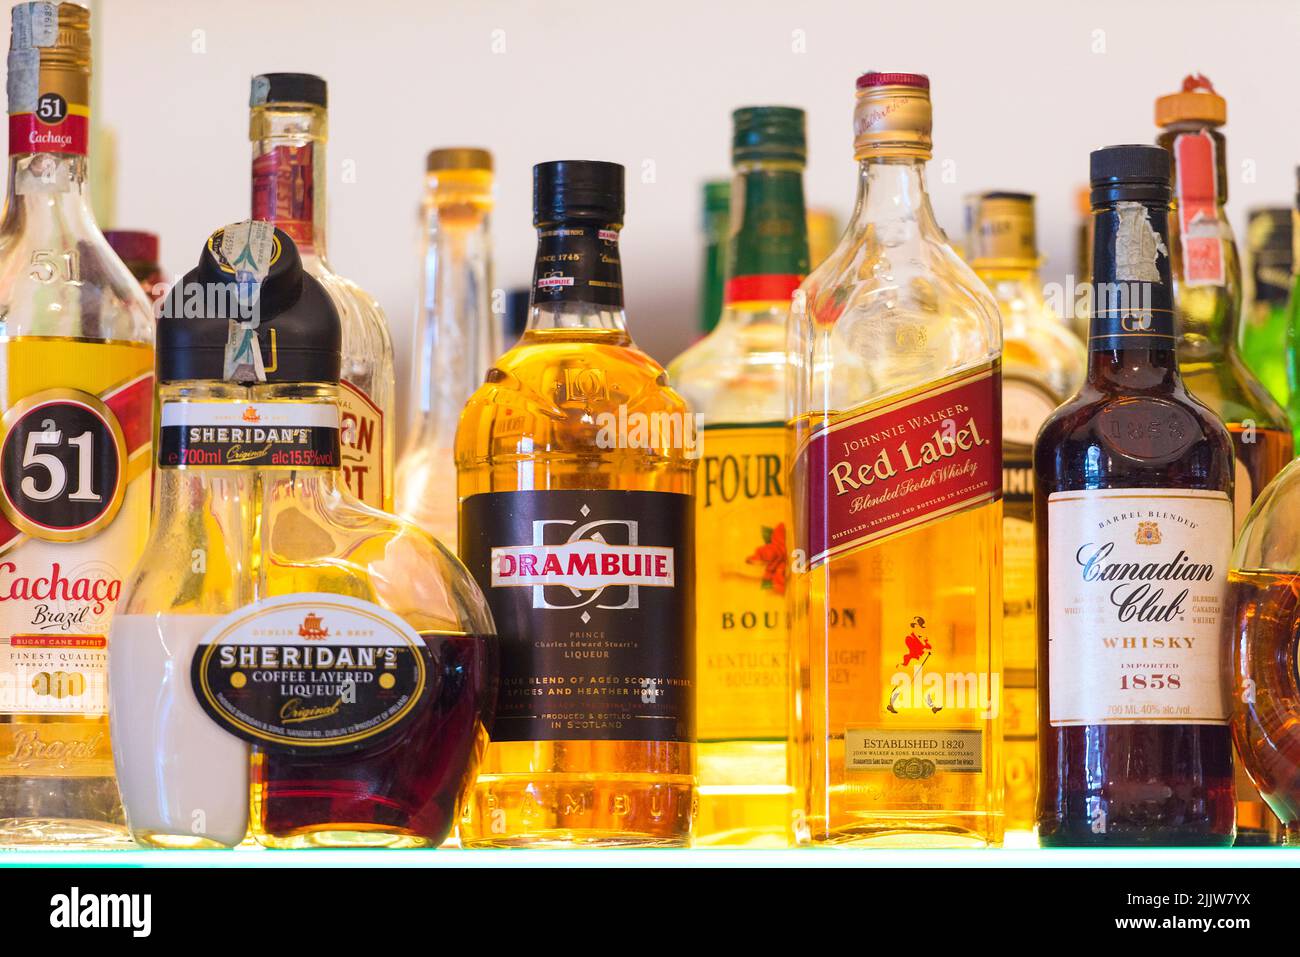 NAPLES - MAR 26: Shelf in a bar with strong alcohol beverages whiskey, rum, liqueur in Naples March 26, 2017 in Italy Stock Photo